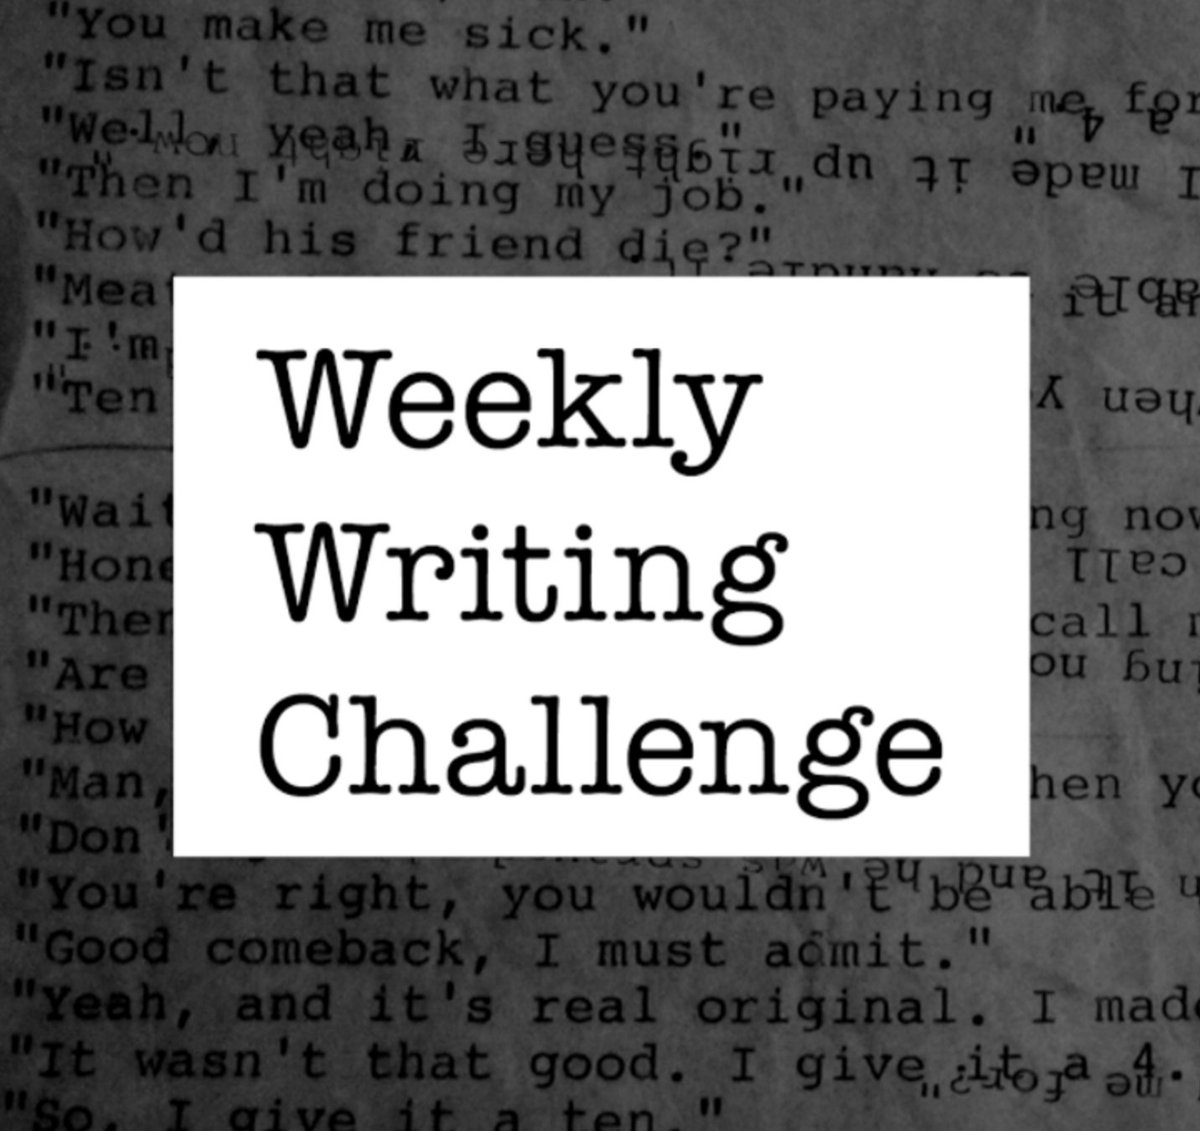 Allow me to introduce you to the #WeeklyWritingChallenge... https://t.co/xdPD2Vm23d https://t.co/VNMWqwaxI4